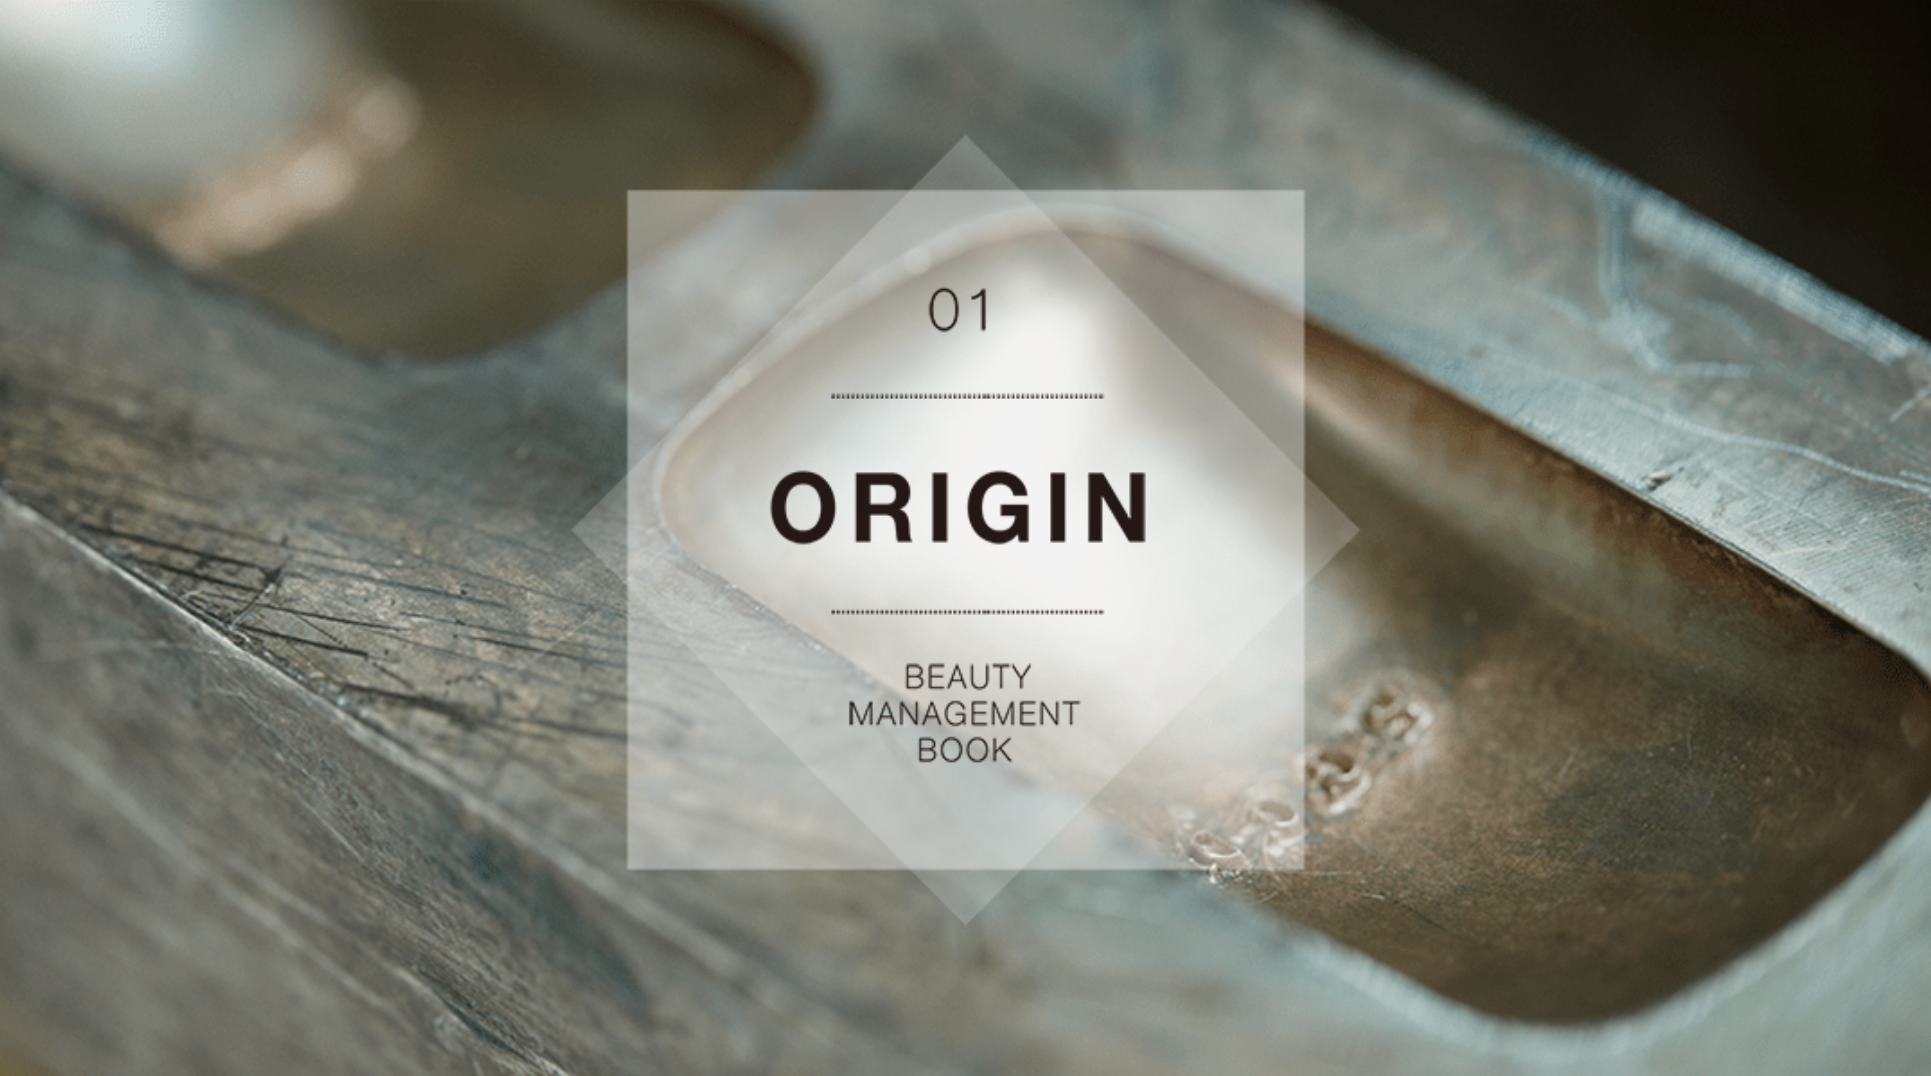 Beauty Management Book 01 ORIGINP.G.C.D.Japan representative Taihei Noda, a story of traveling to its roots.